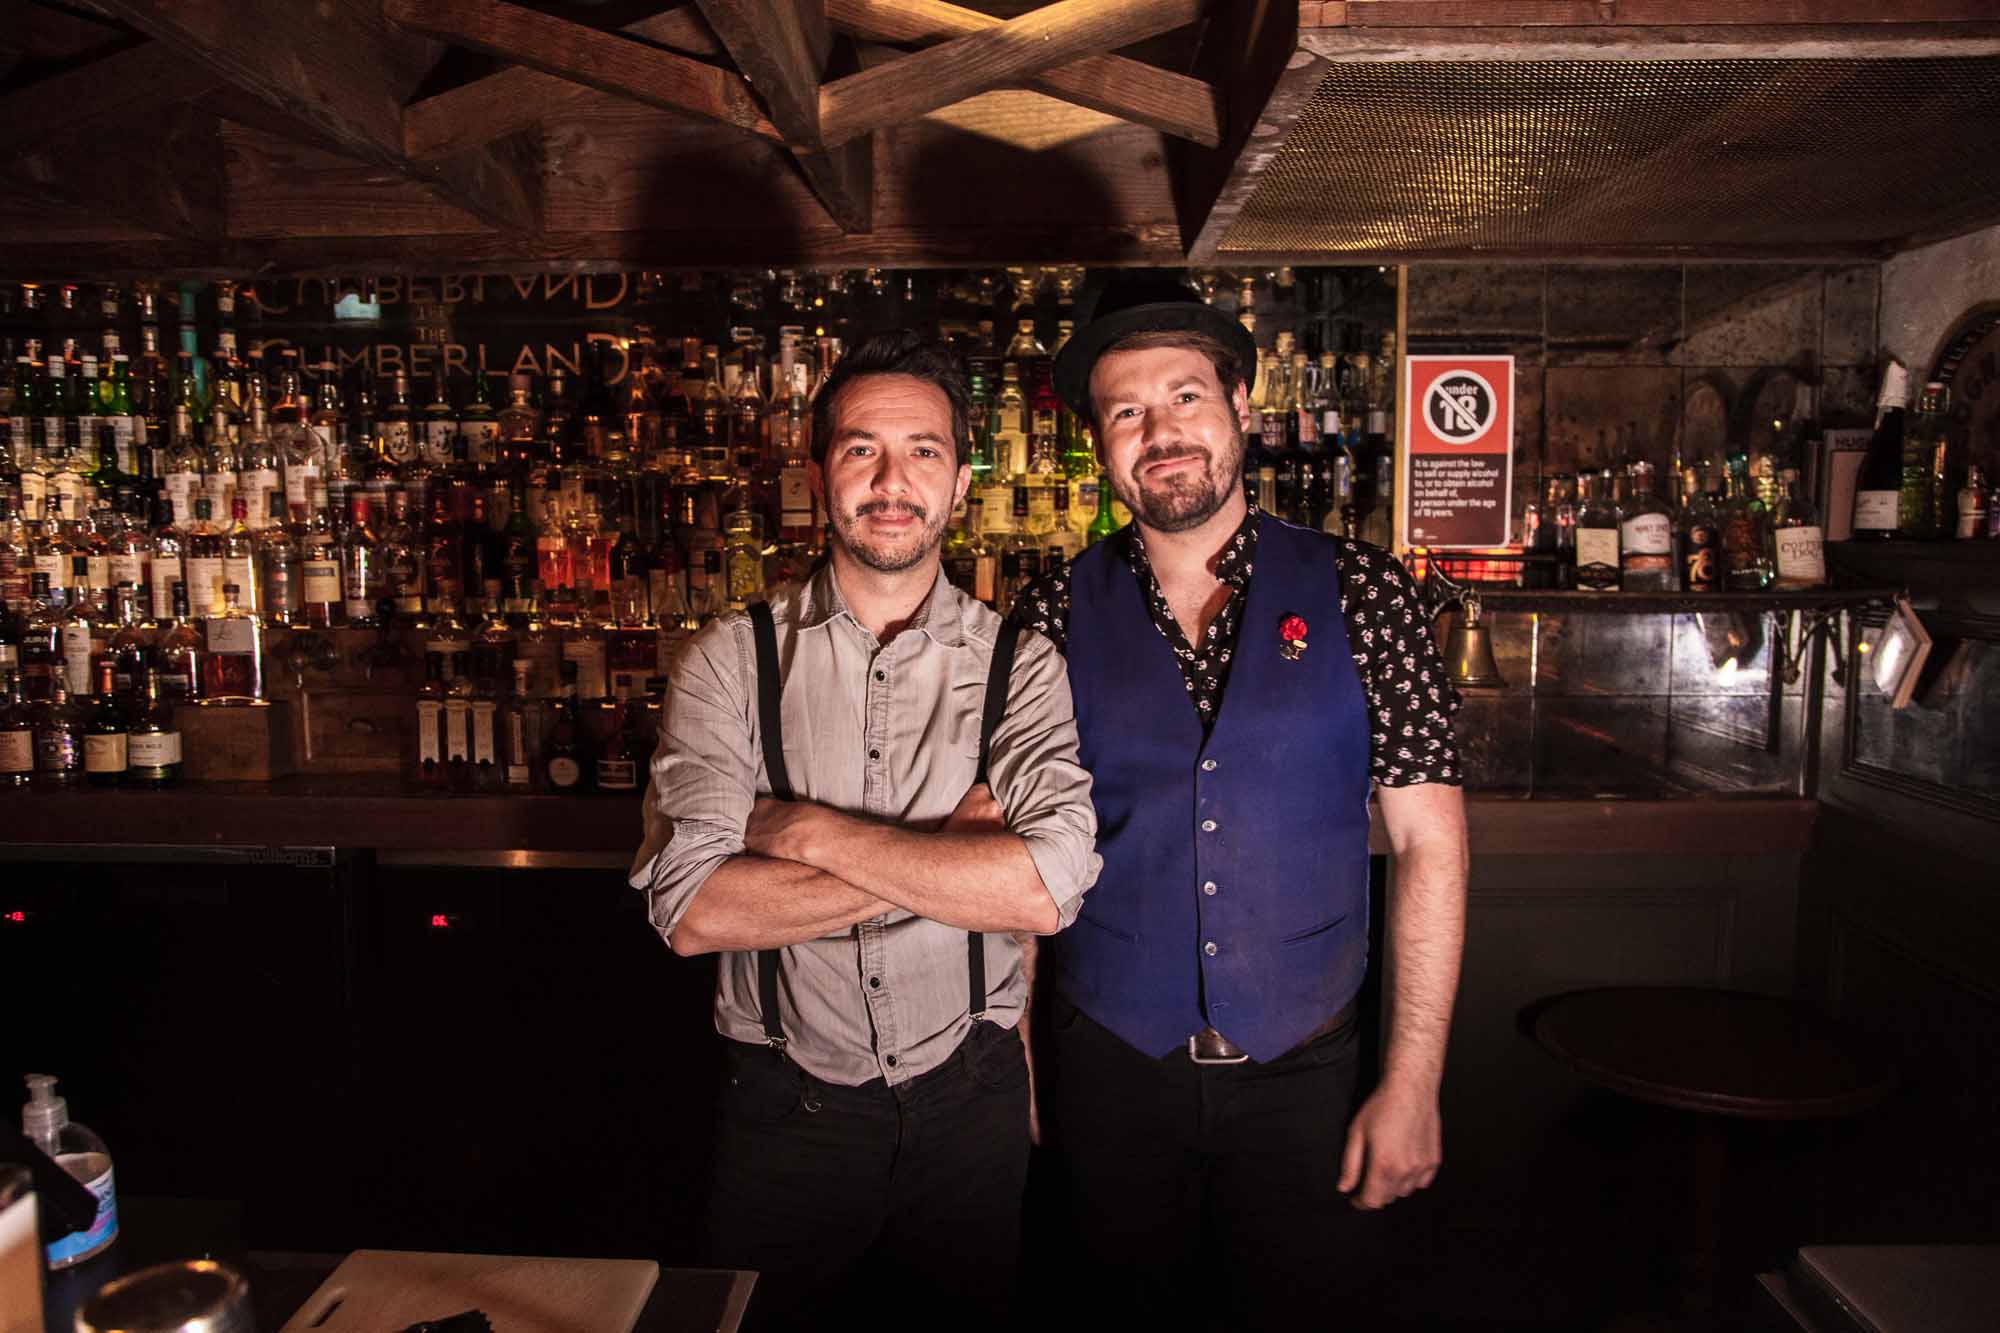 Bar manager Petr Dvorak and owner Pete Ehemann at The Cumberland. Photo: Boothby